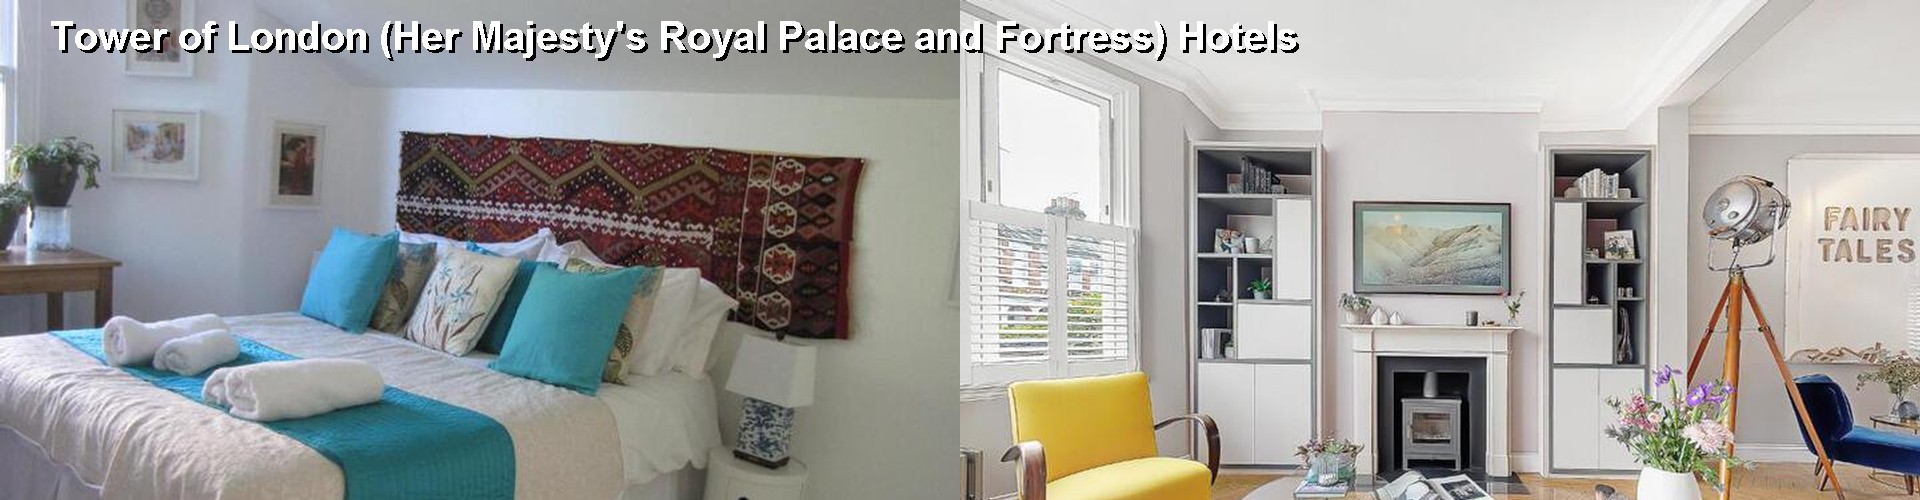 5 Best Hotels near Tower of London (Her Majesty's Royal Palace and Fortress)